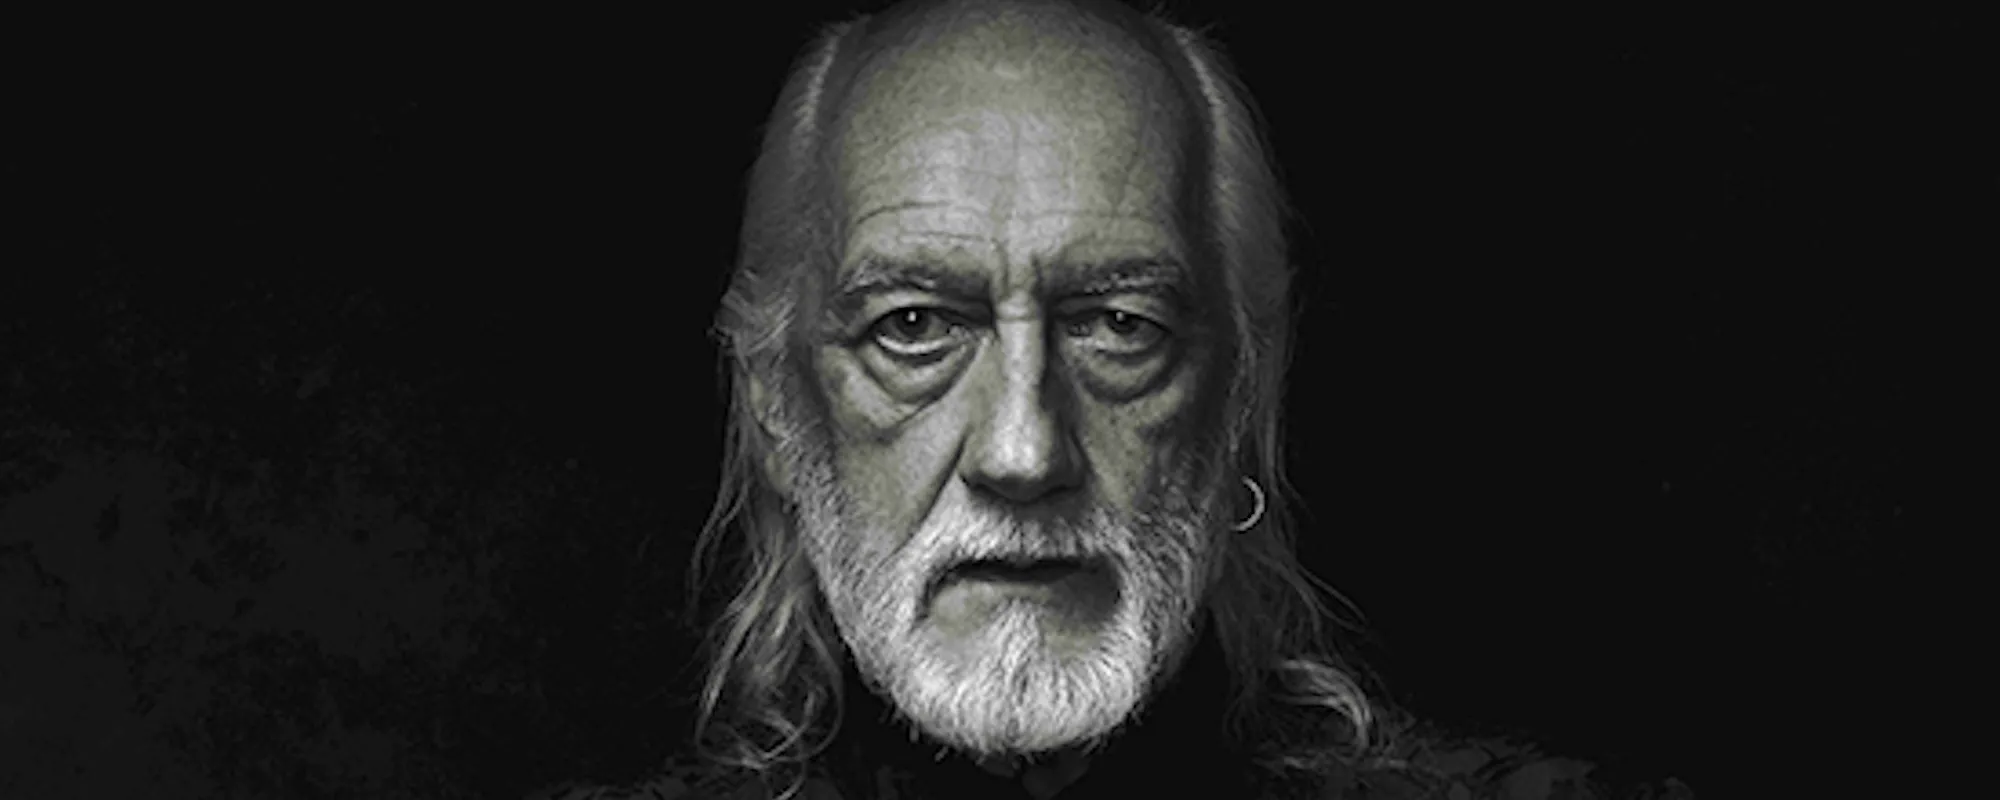 Mick Fleetwood to Produce TV Series ’13 Songs’